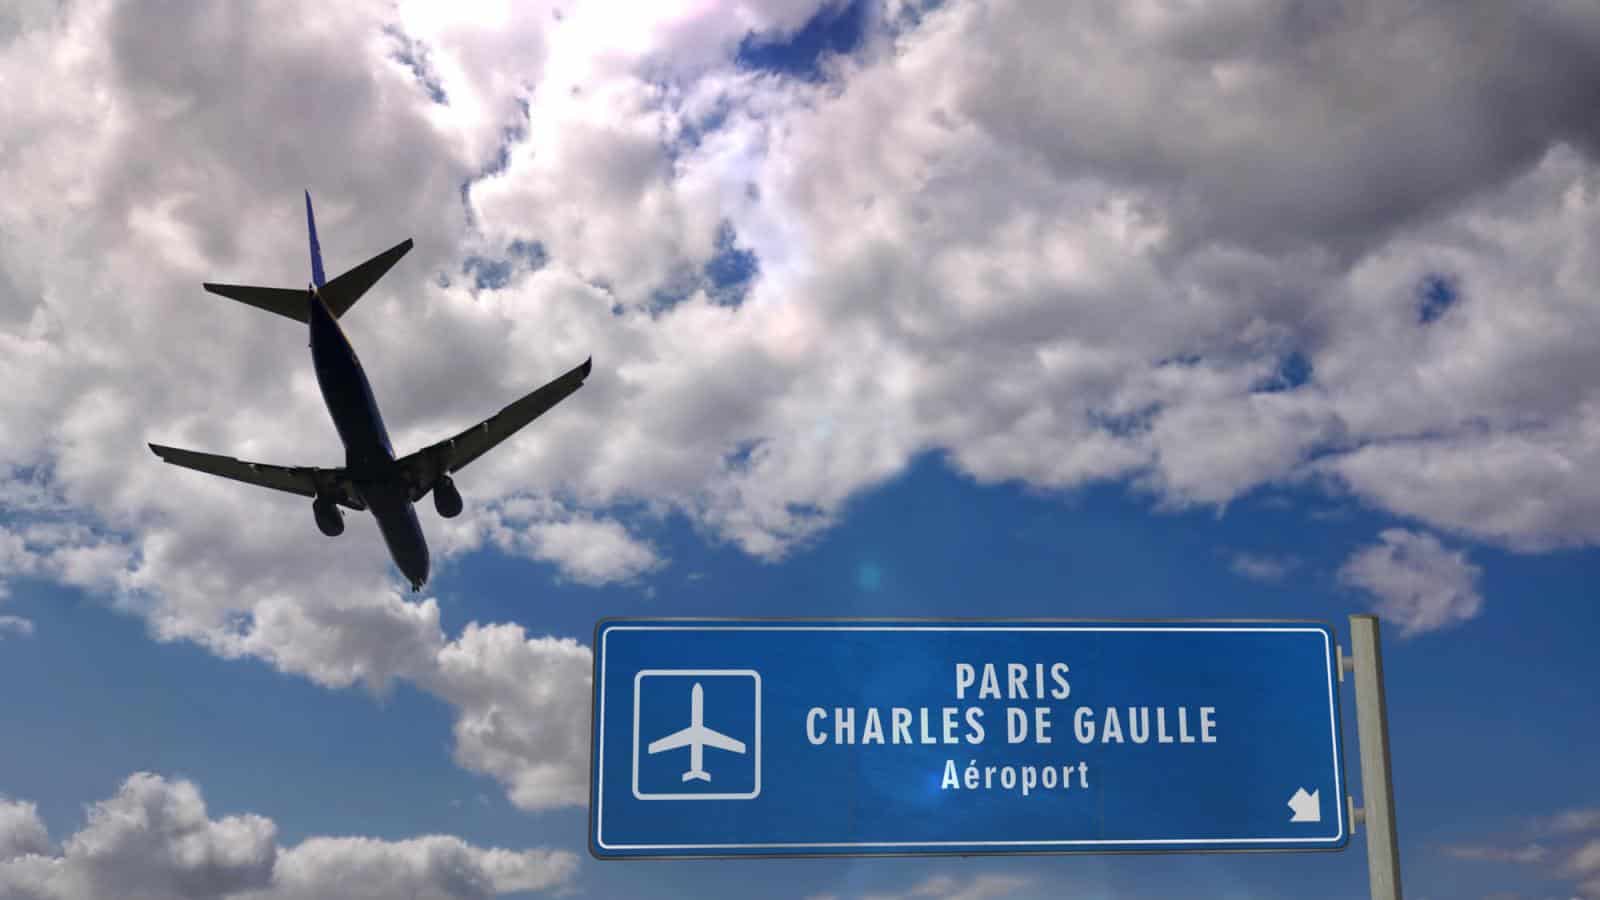 Sign for Paris Charles de Gaulle Airport with plane flying overhead